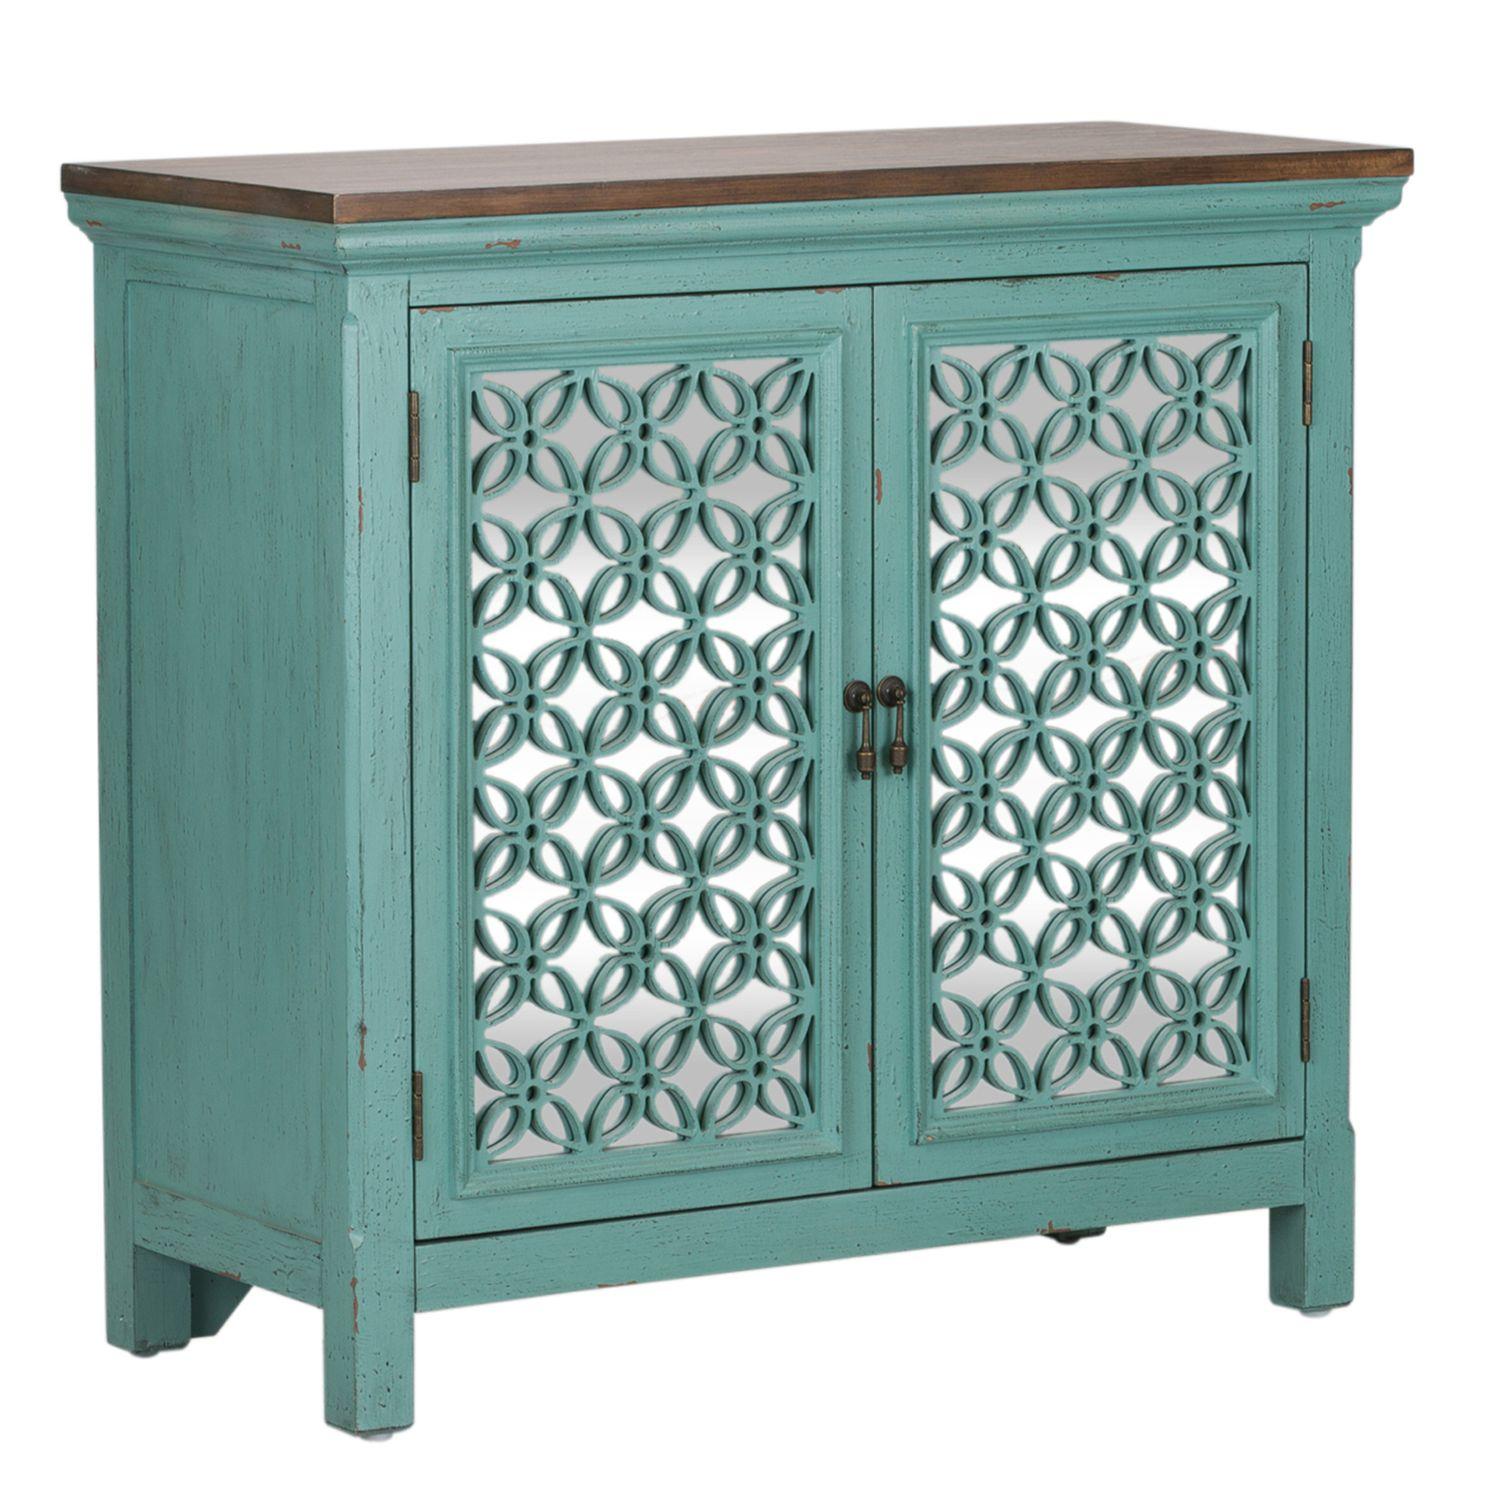 Transitional Cabinet Kengsinton 2011-AC3836 in Turquoise 